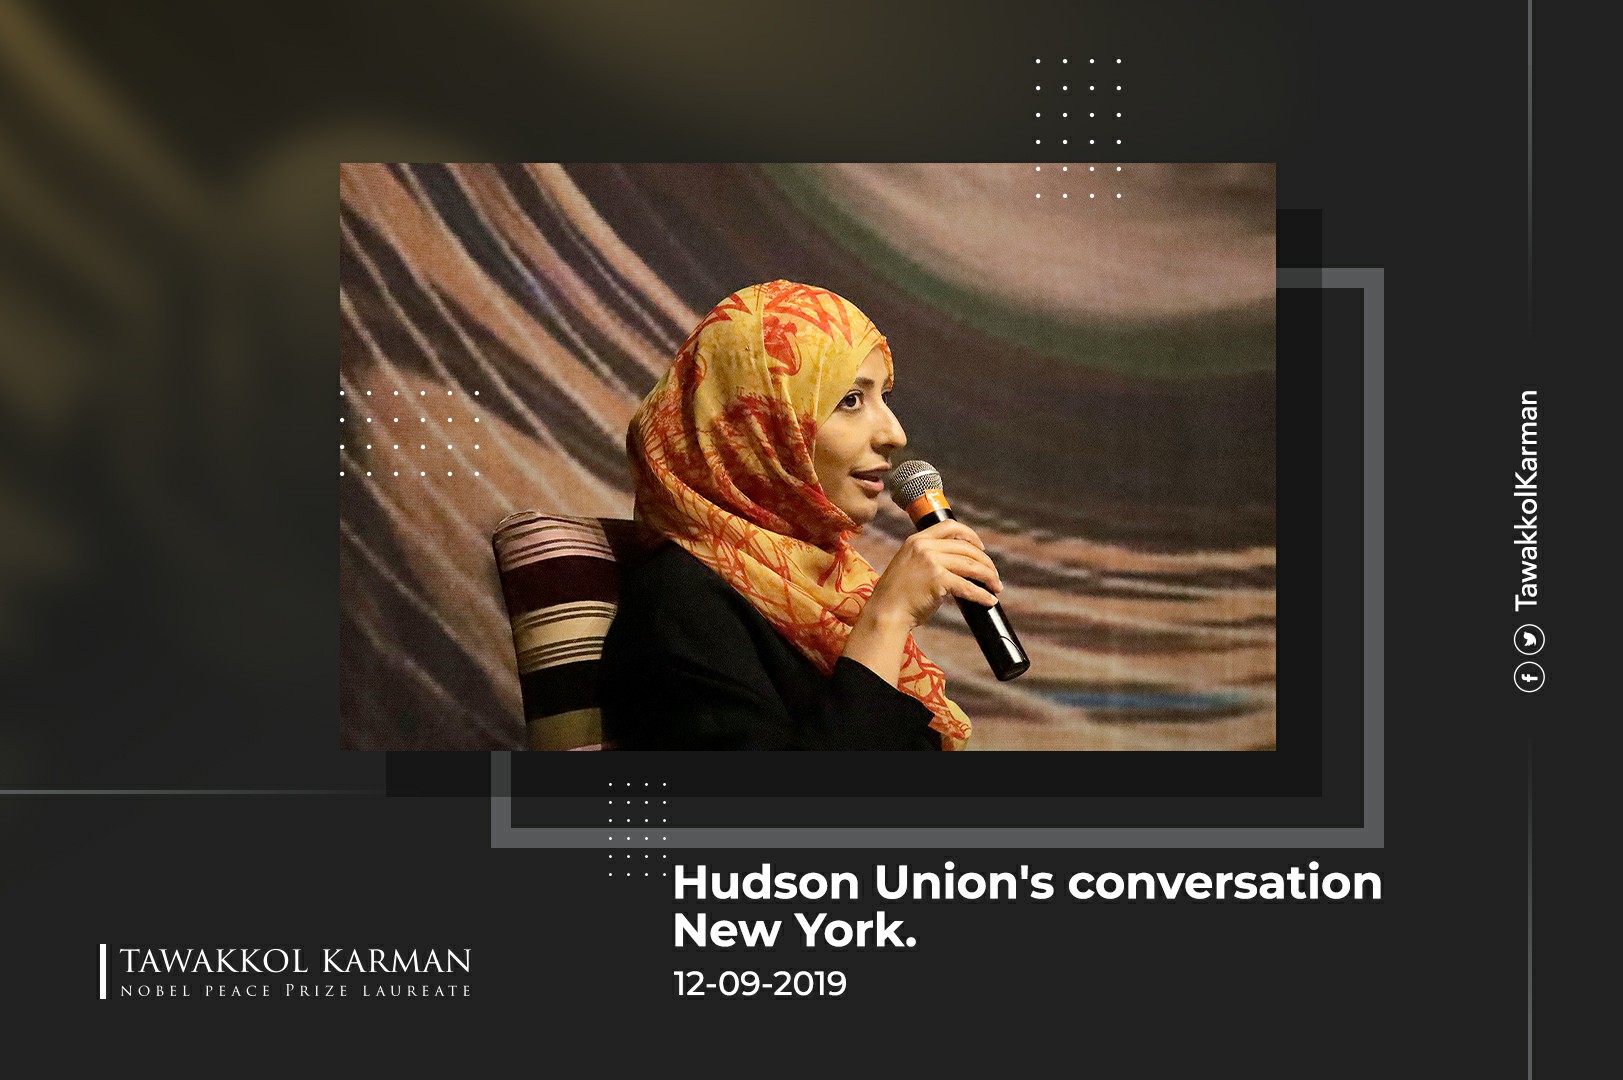 Lecture by Tawakkol Karman at the Hudson Union's conversation, New York